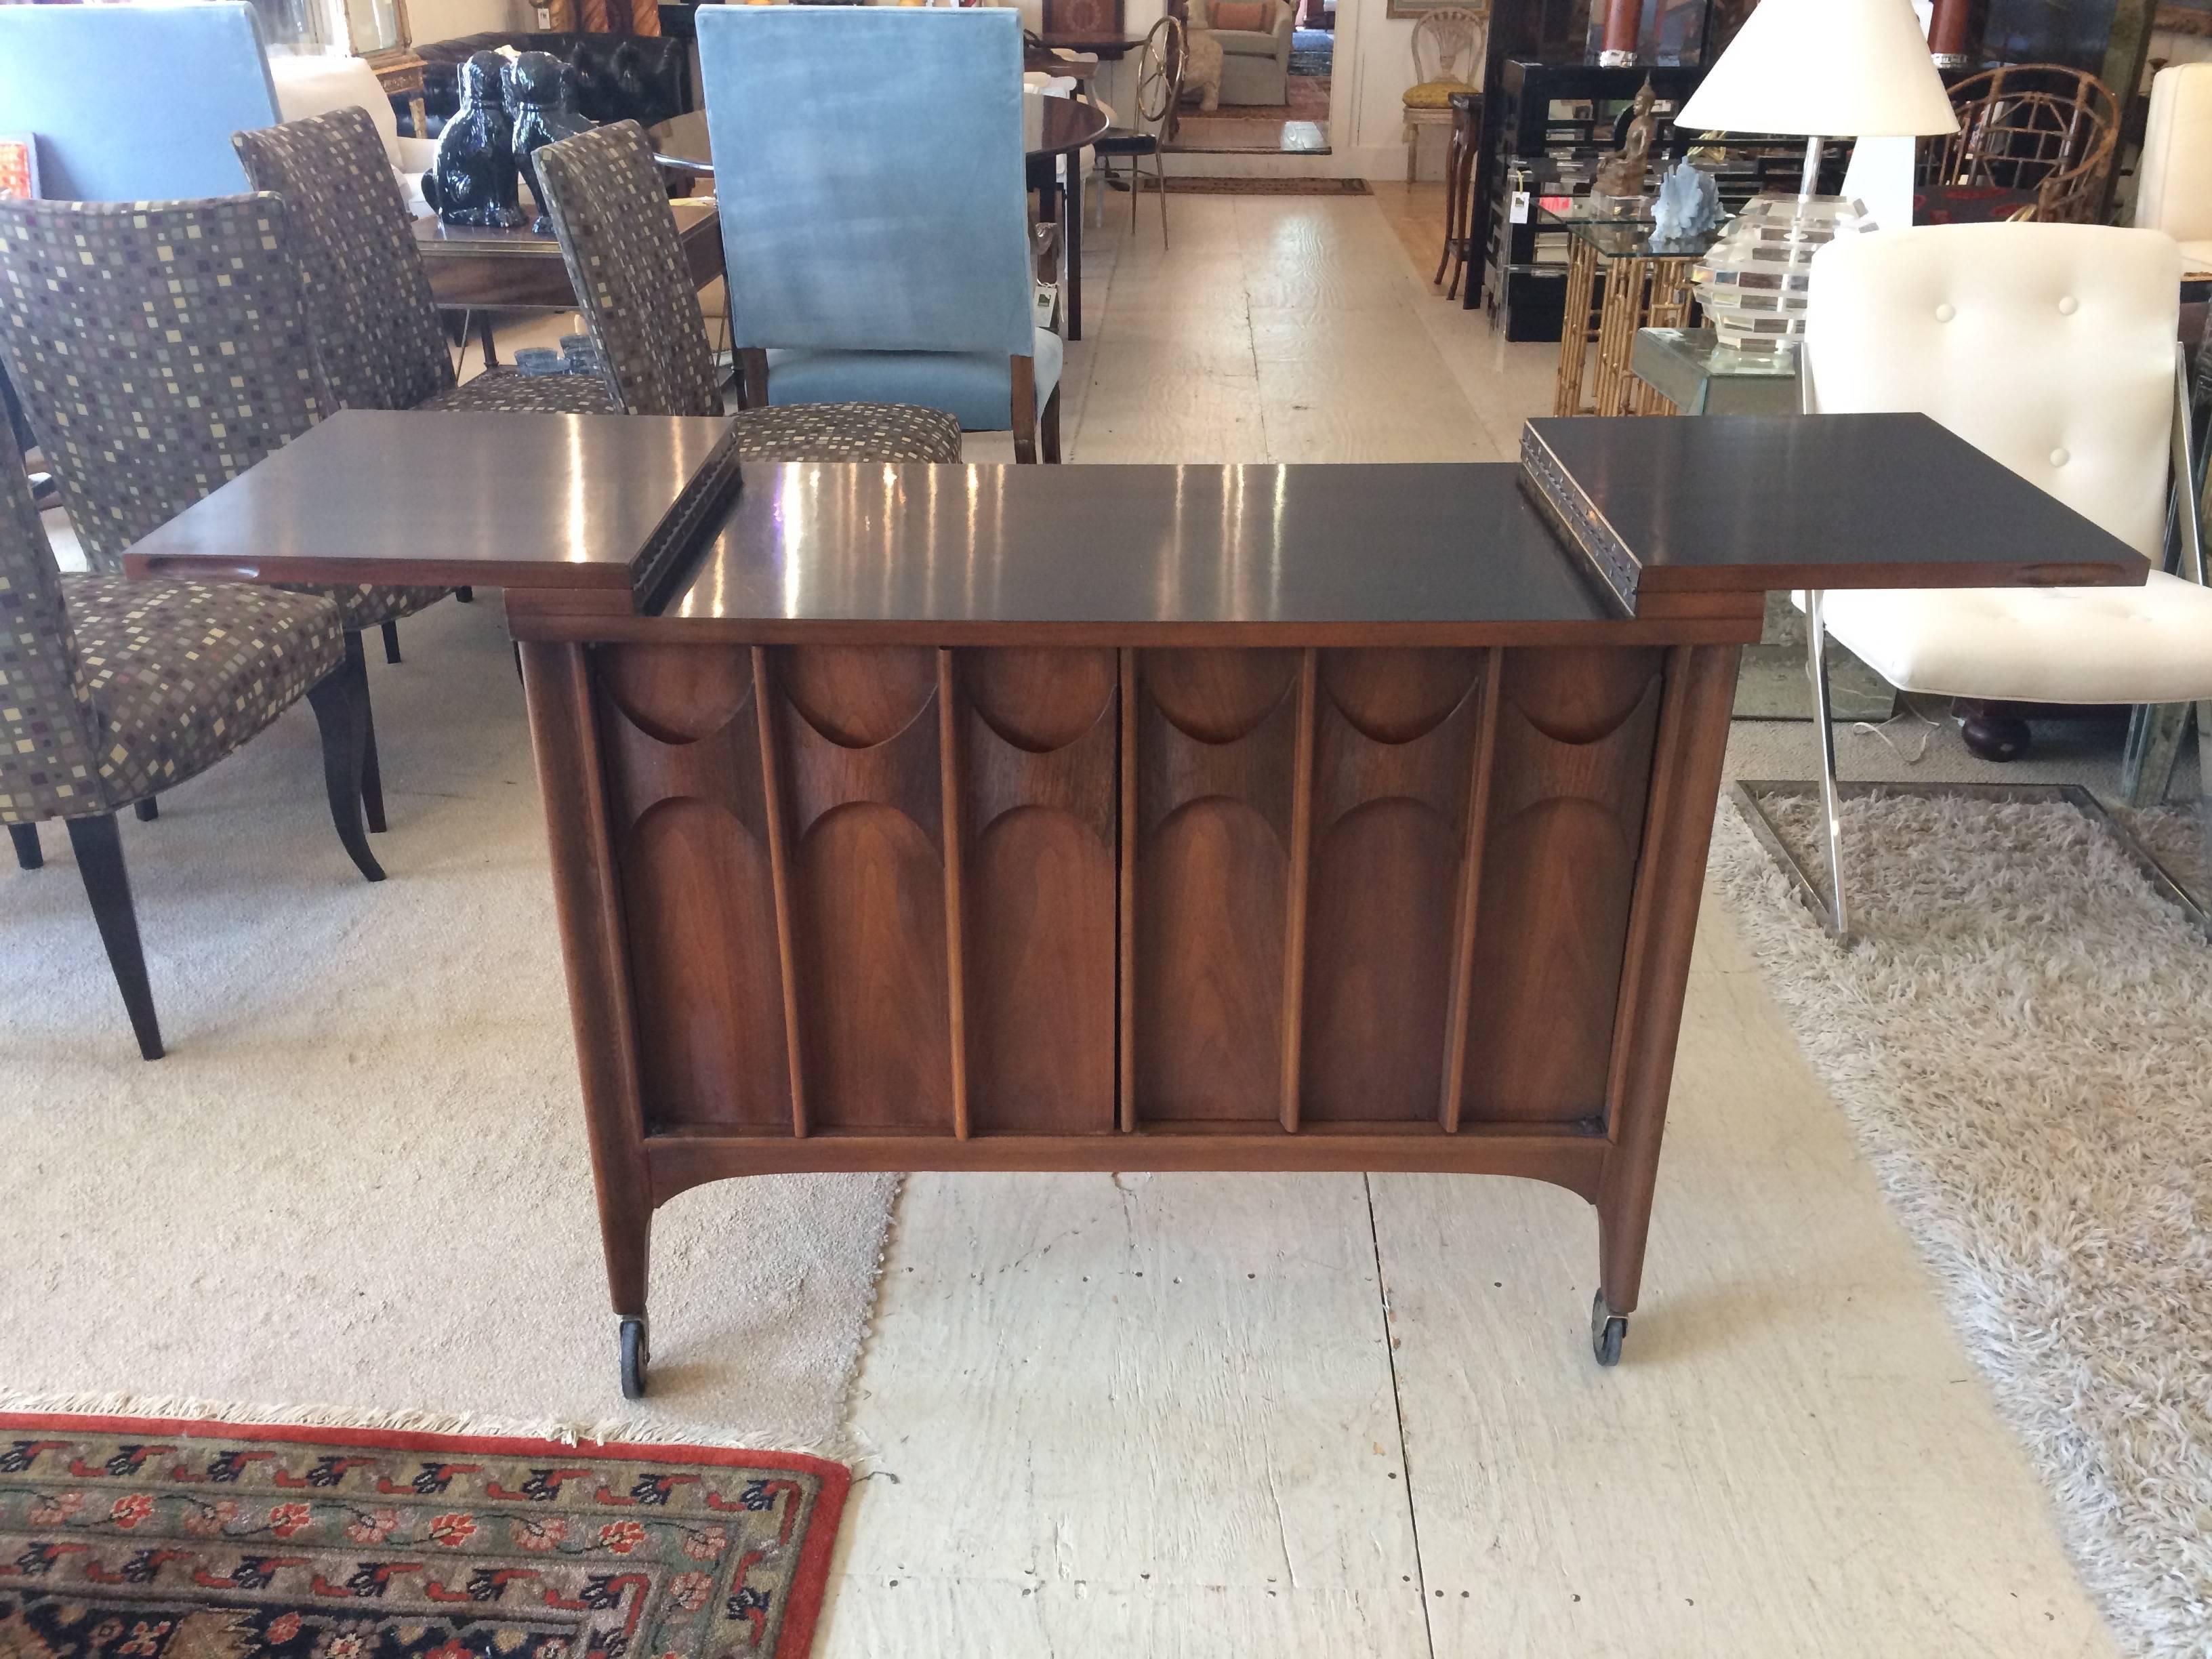 Beautiful mahogany server or bar cart with Danish modern vibe, sculpted 3 dimensional front doors that open to storage within. Top opens out to reveal a black formica surface. Tapered feet on casters. Fully extended 65.5 W.